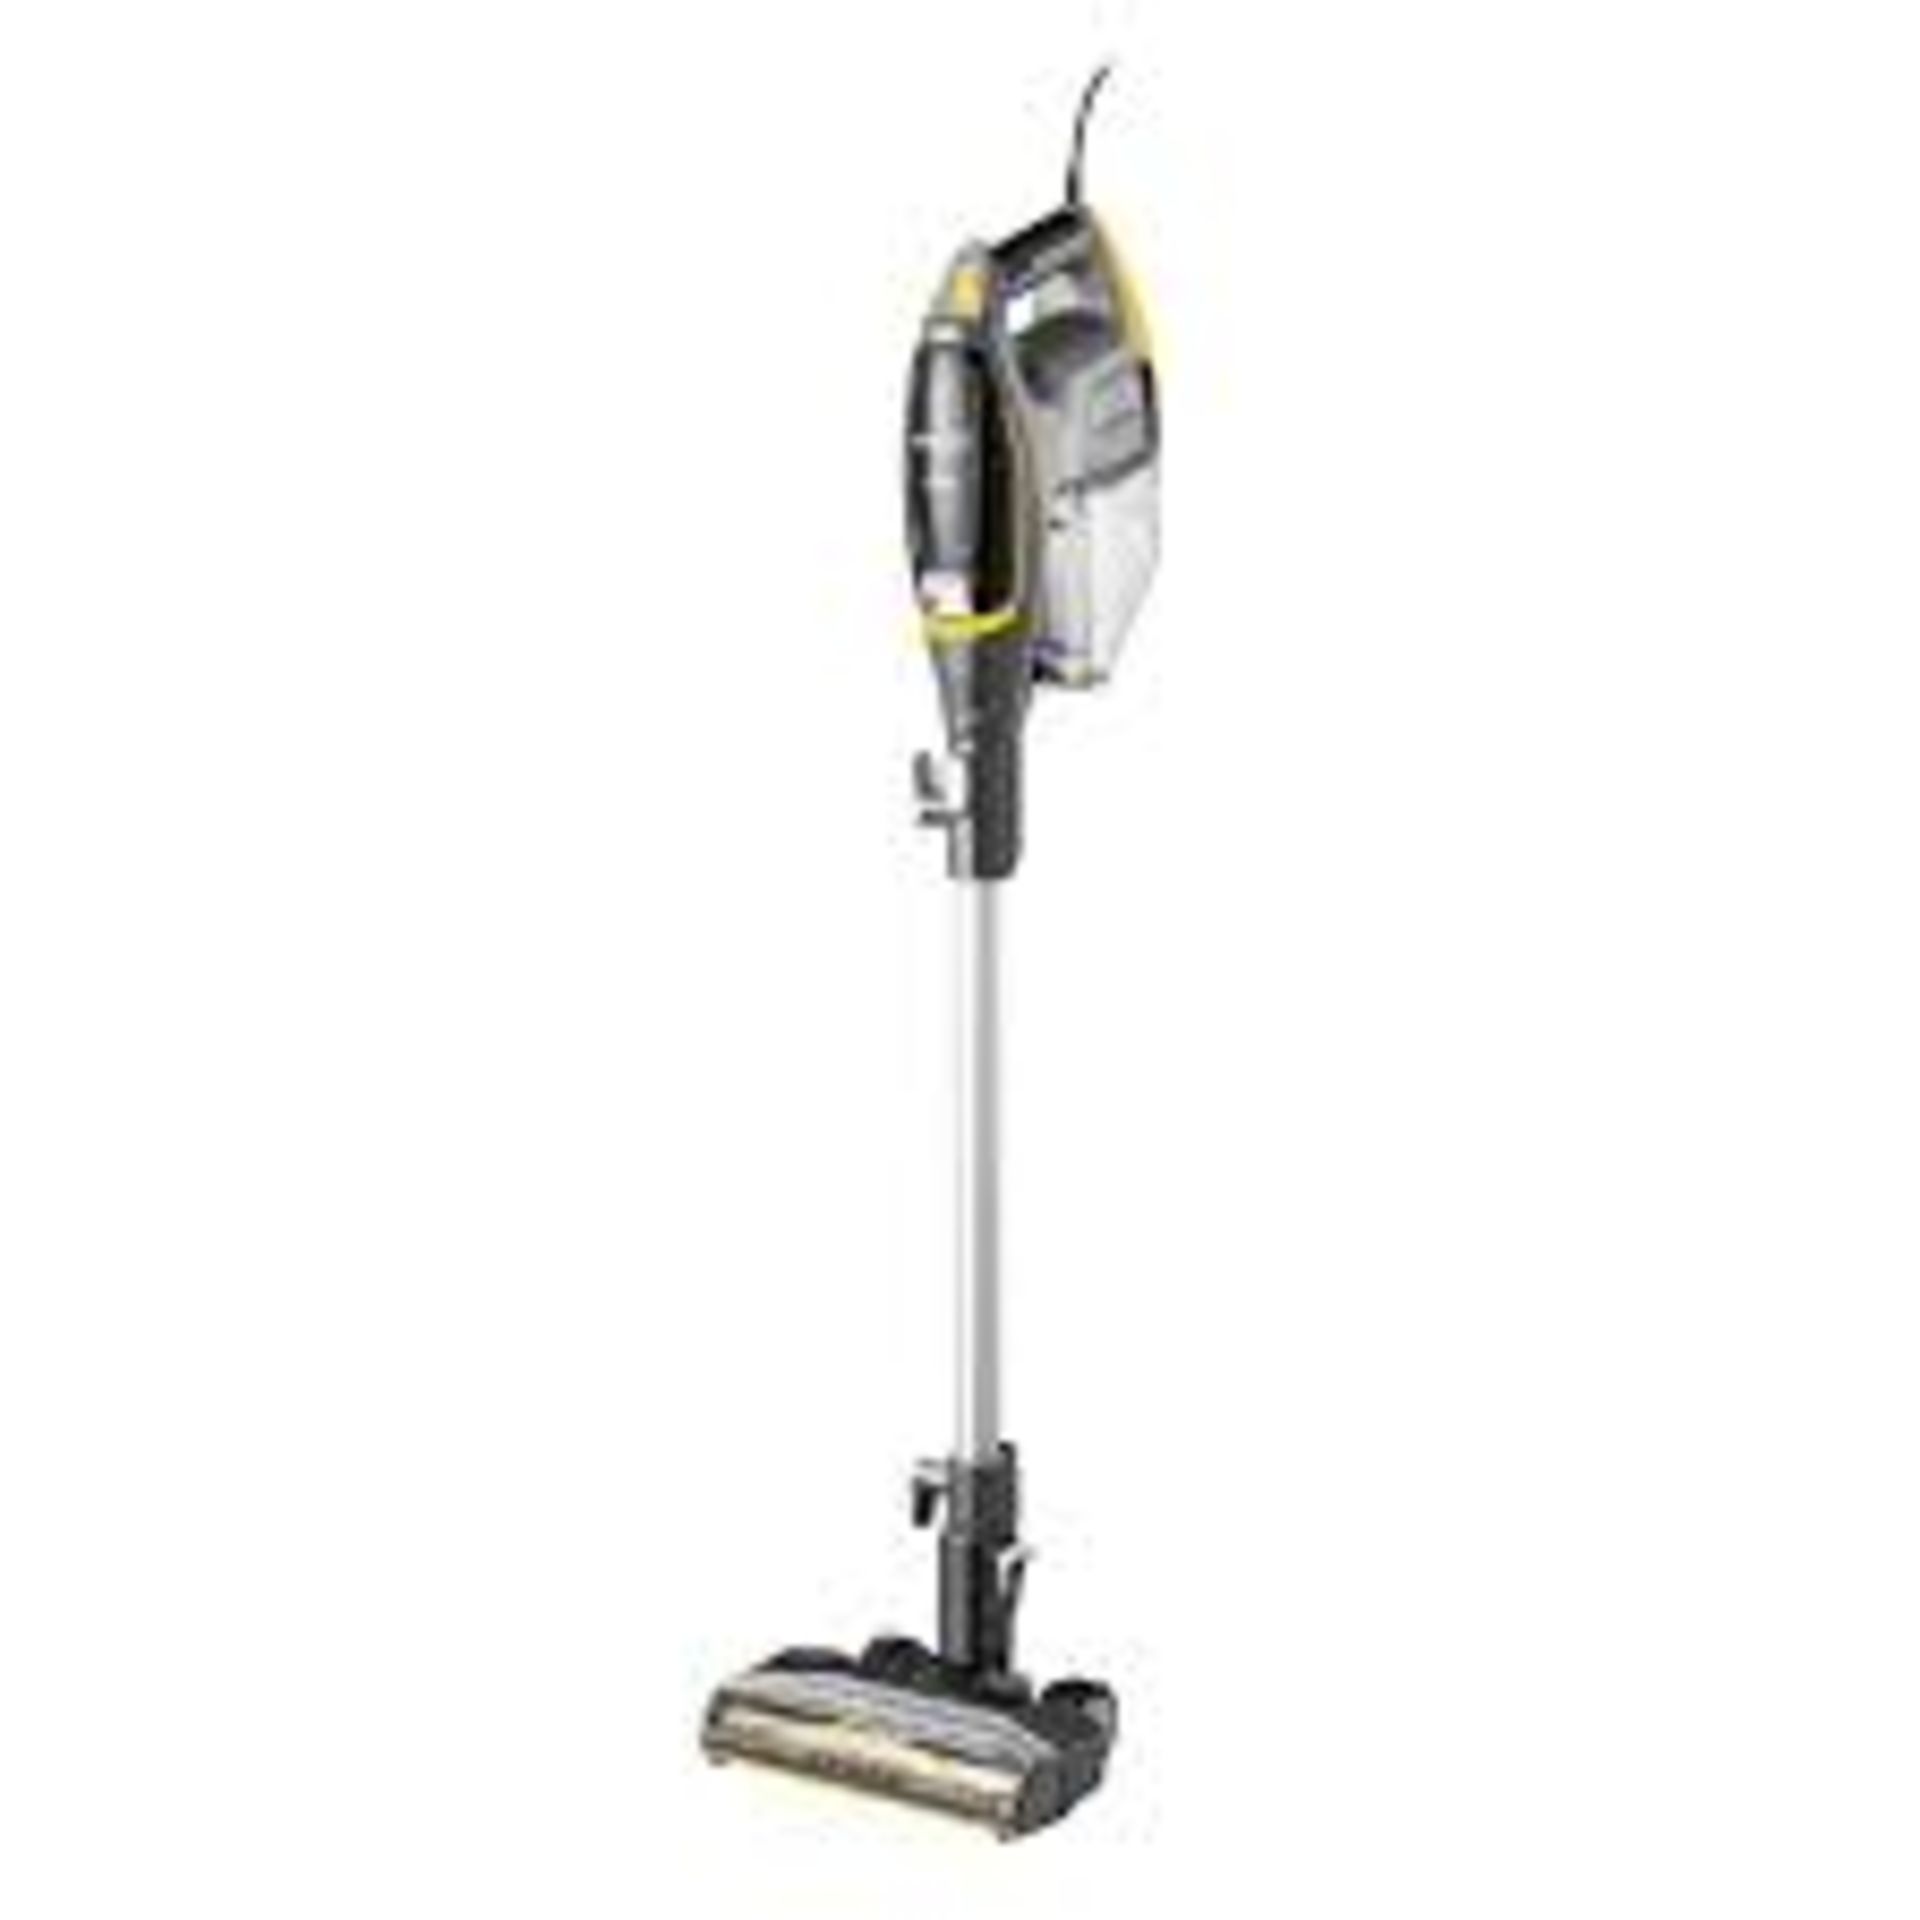 12 X BRAND NEW Eureka NES510 2-in-1 Corded Stick & Handheld Vacuum Cleaner, 400W Motor for Whole - Image 2 of 3